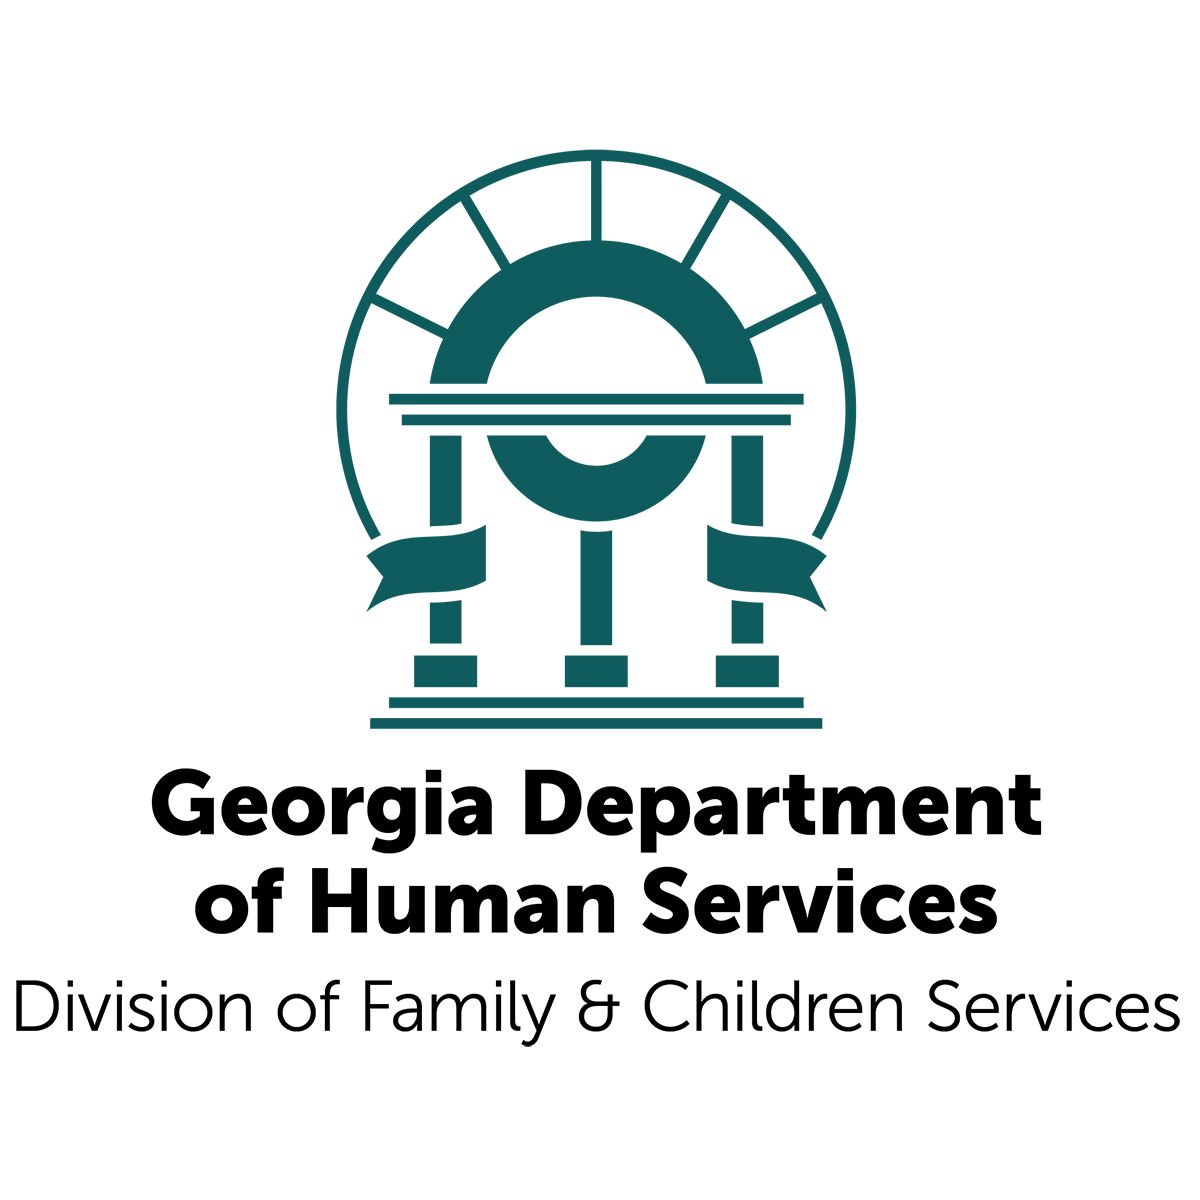 Georgia Department of Human Services Division of Family and Children Services Logo